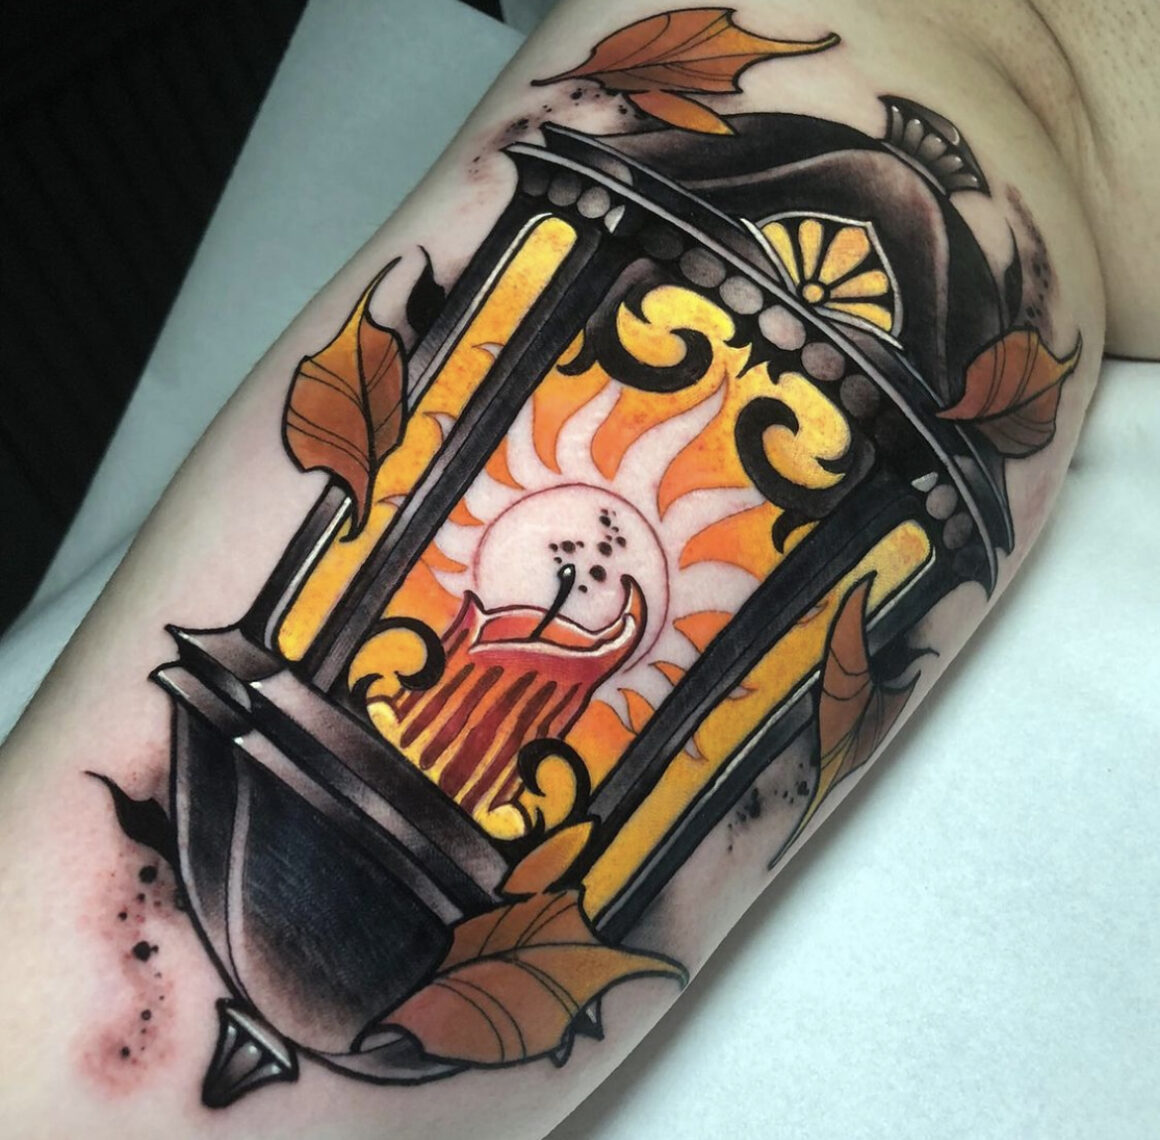 Lantern Tattoos And DesignsLantern Tattoo Meanings And IdeasLantern Tattoo  Pictures  HubPages